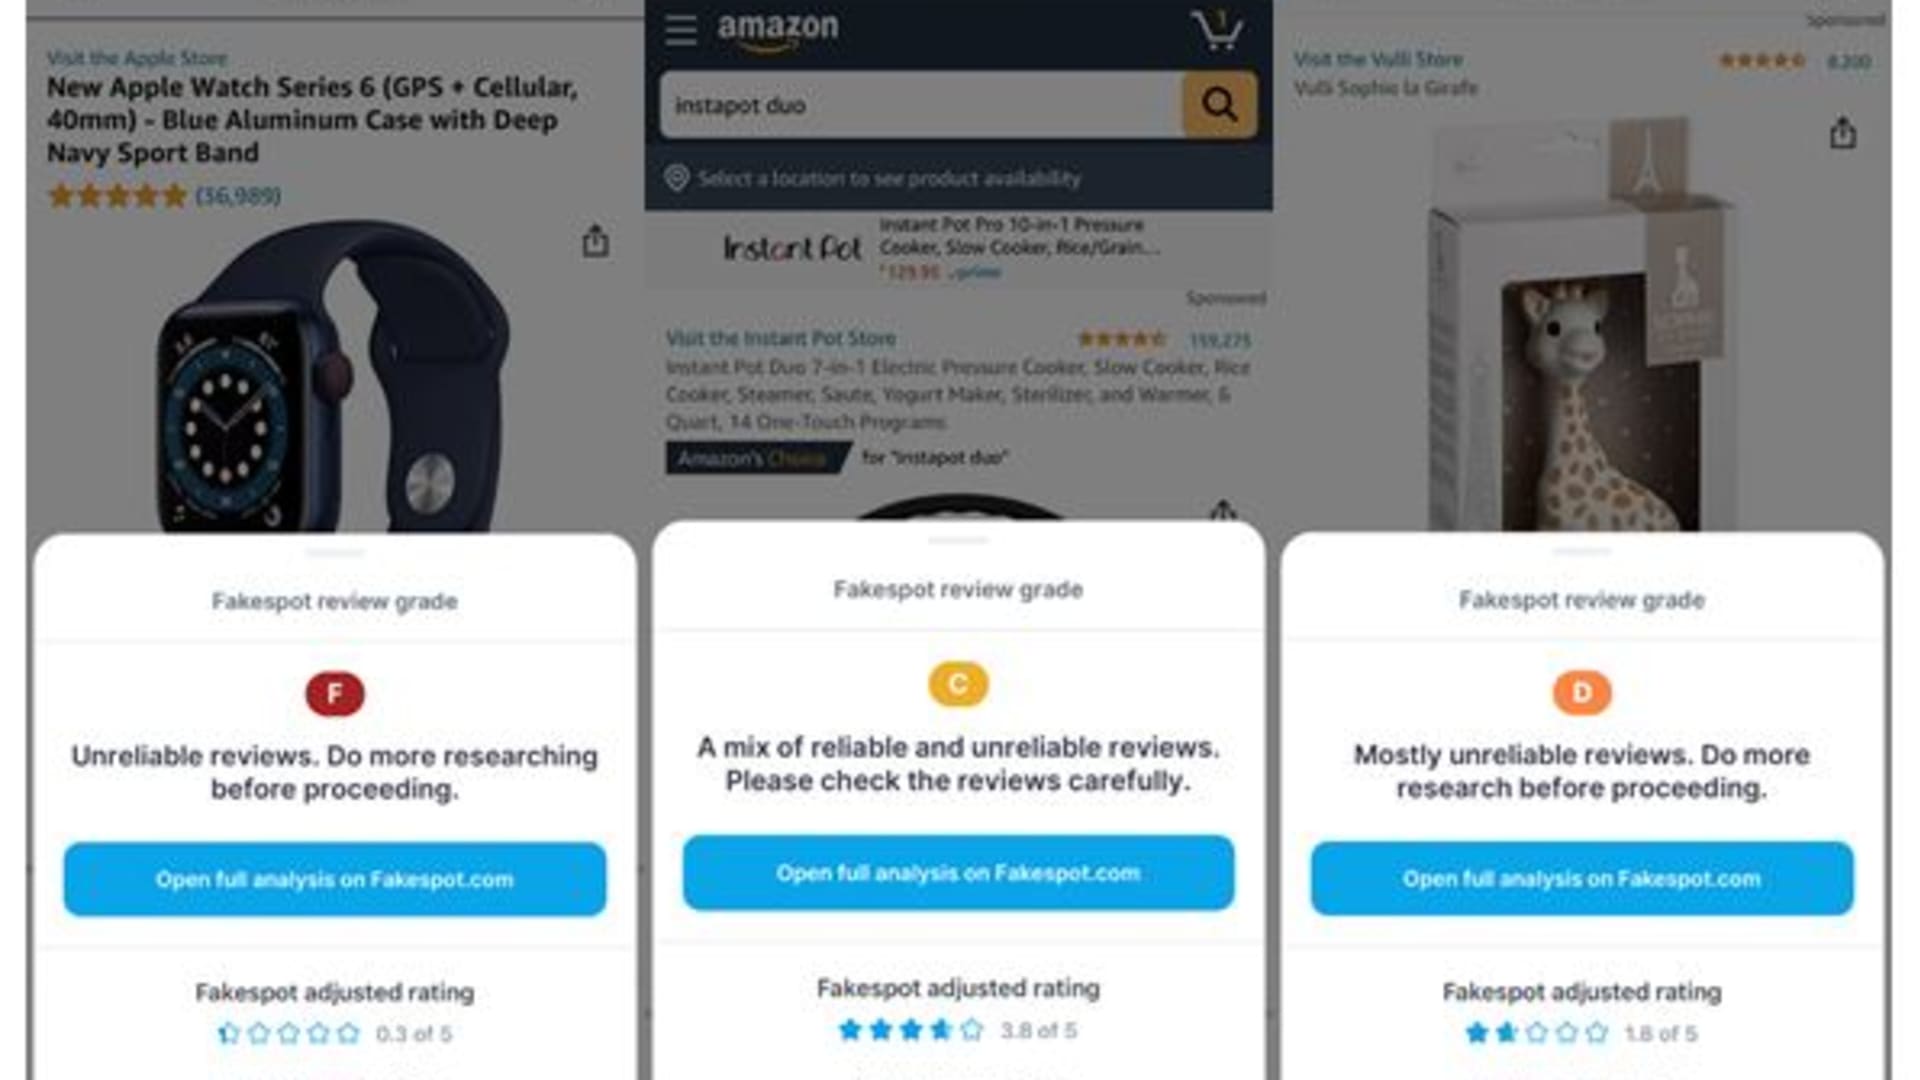 Amazon reported well-known fake review detector app Fakespot to Apple for investigation, triggering its removal from the App Store.